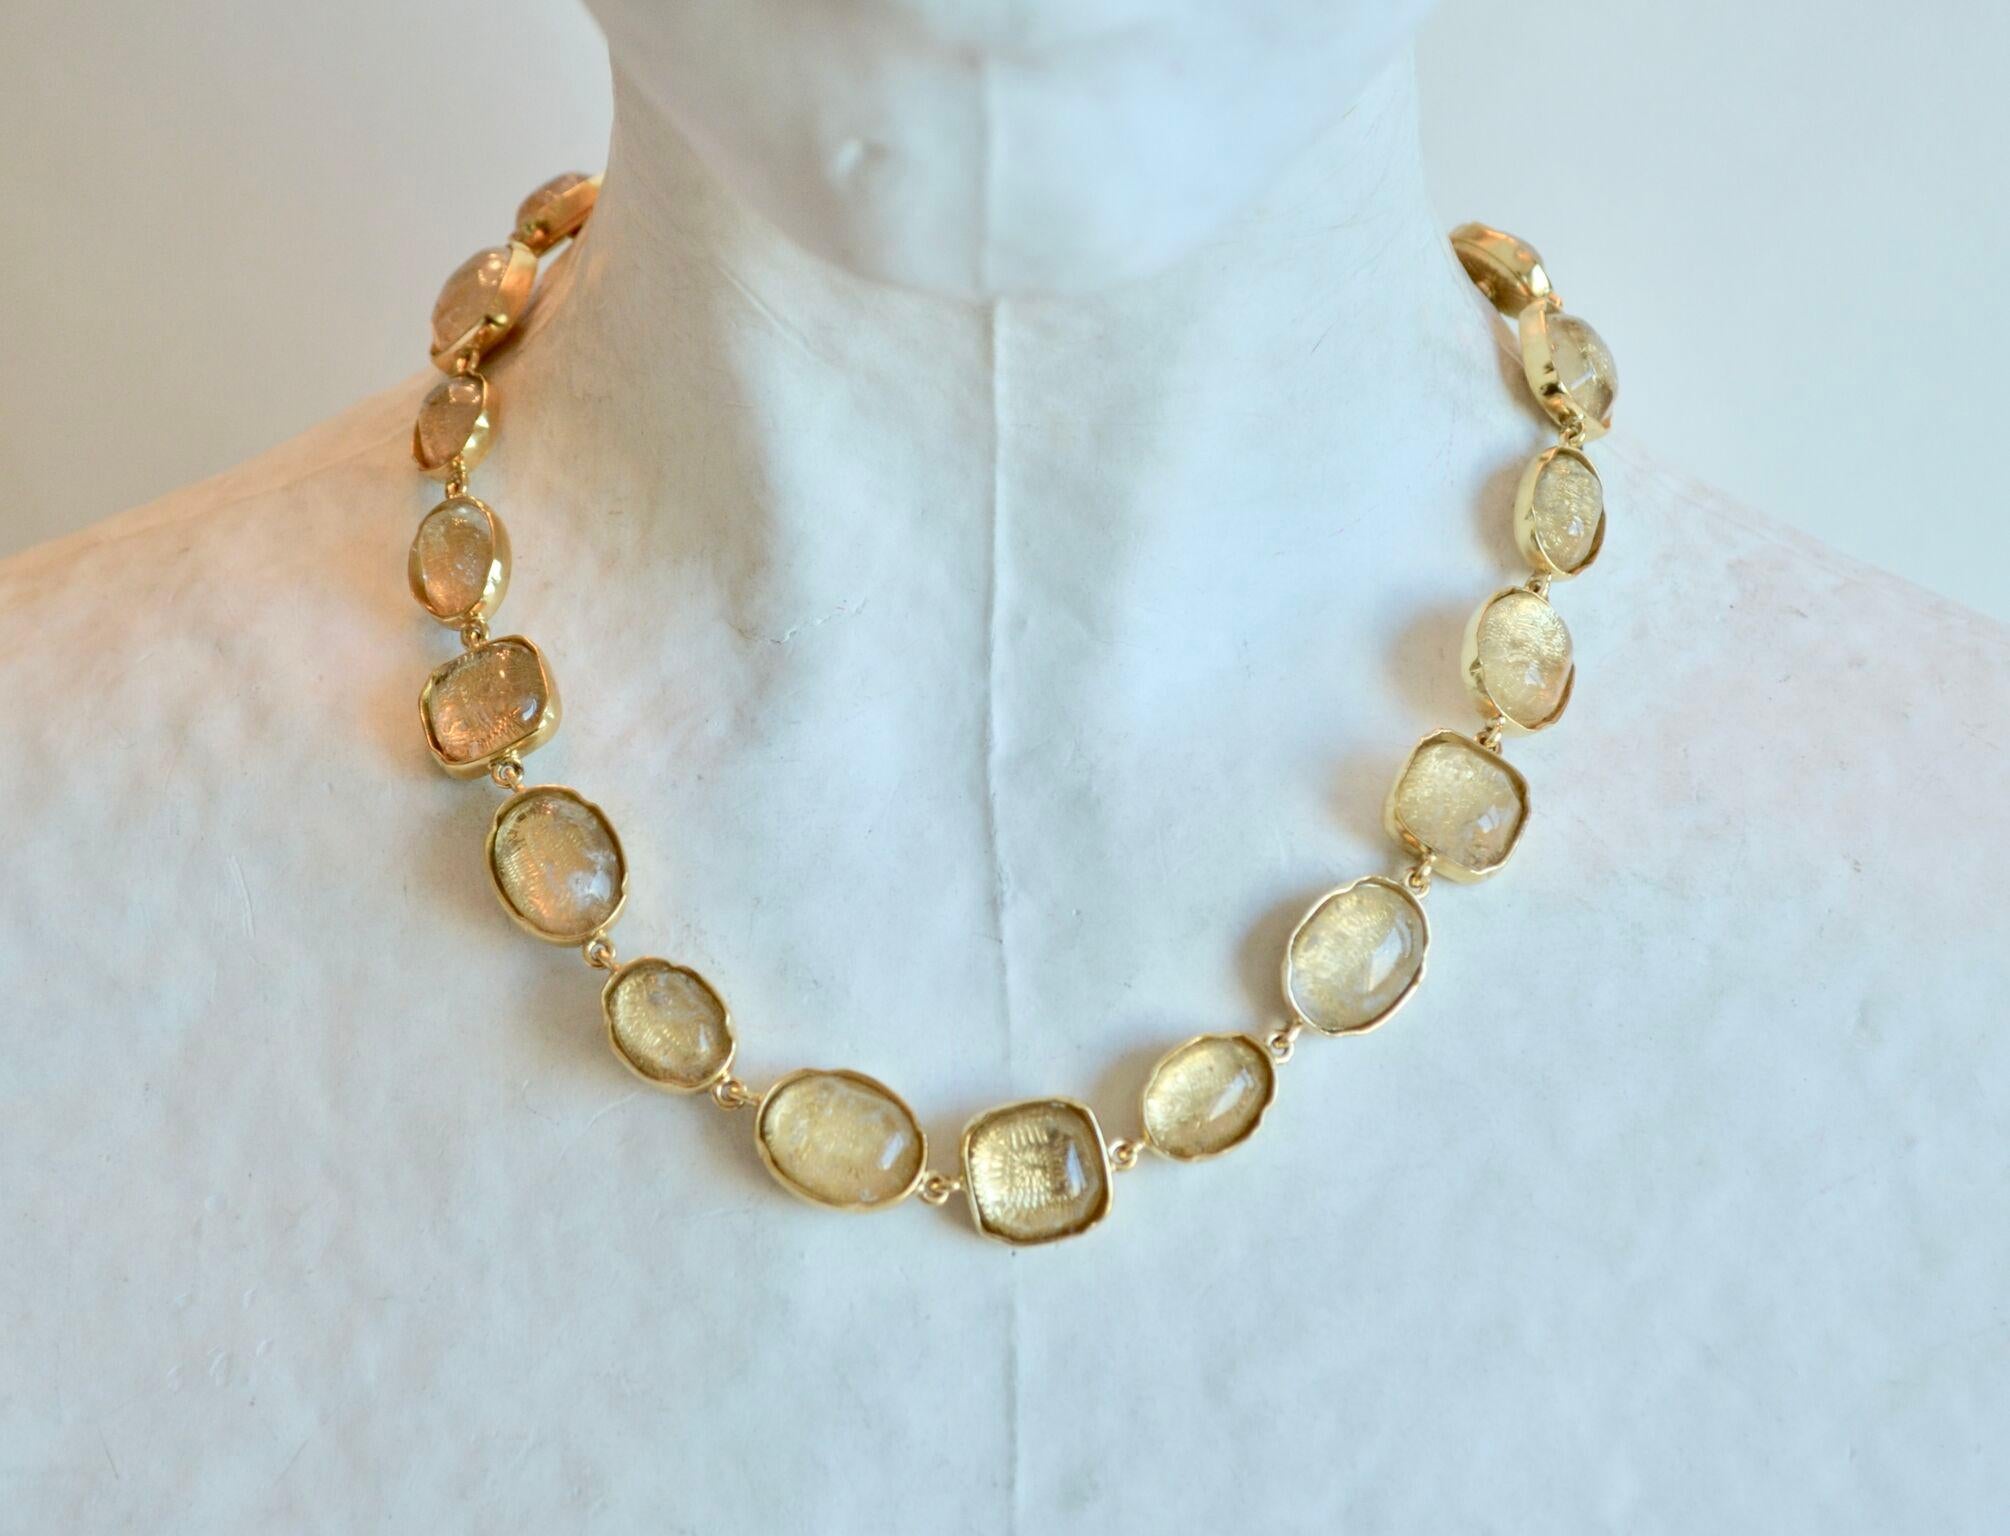 Clear rock crystal necklace set in 24k plated brass from Goossens Paris. 